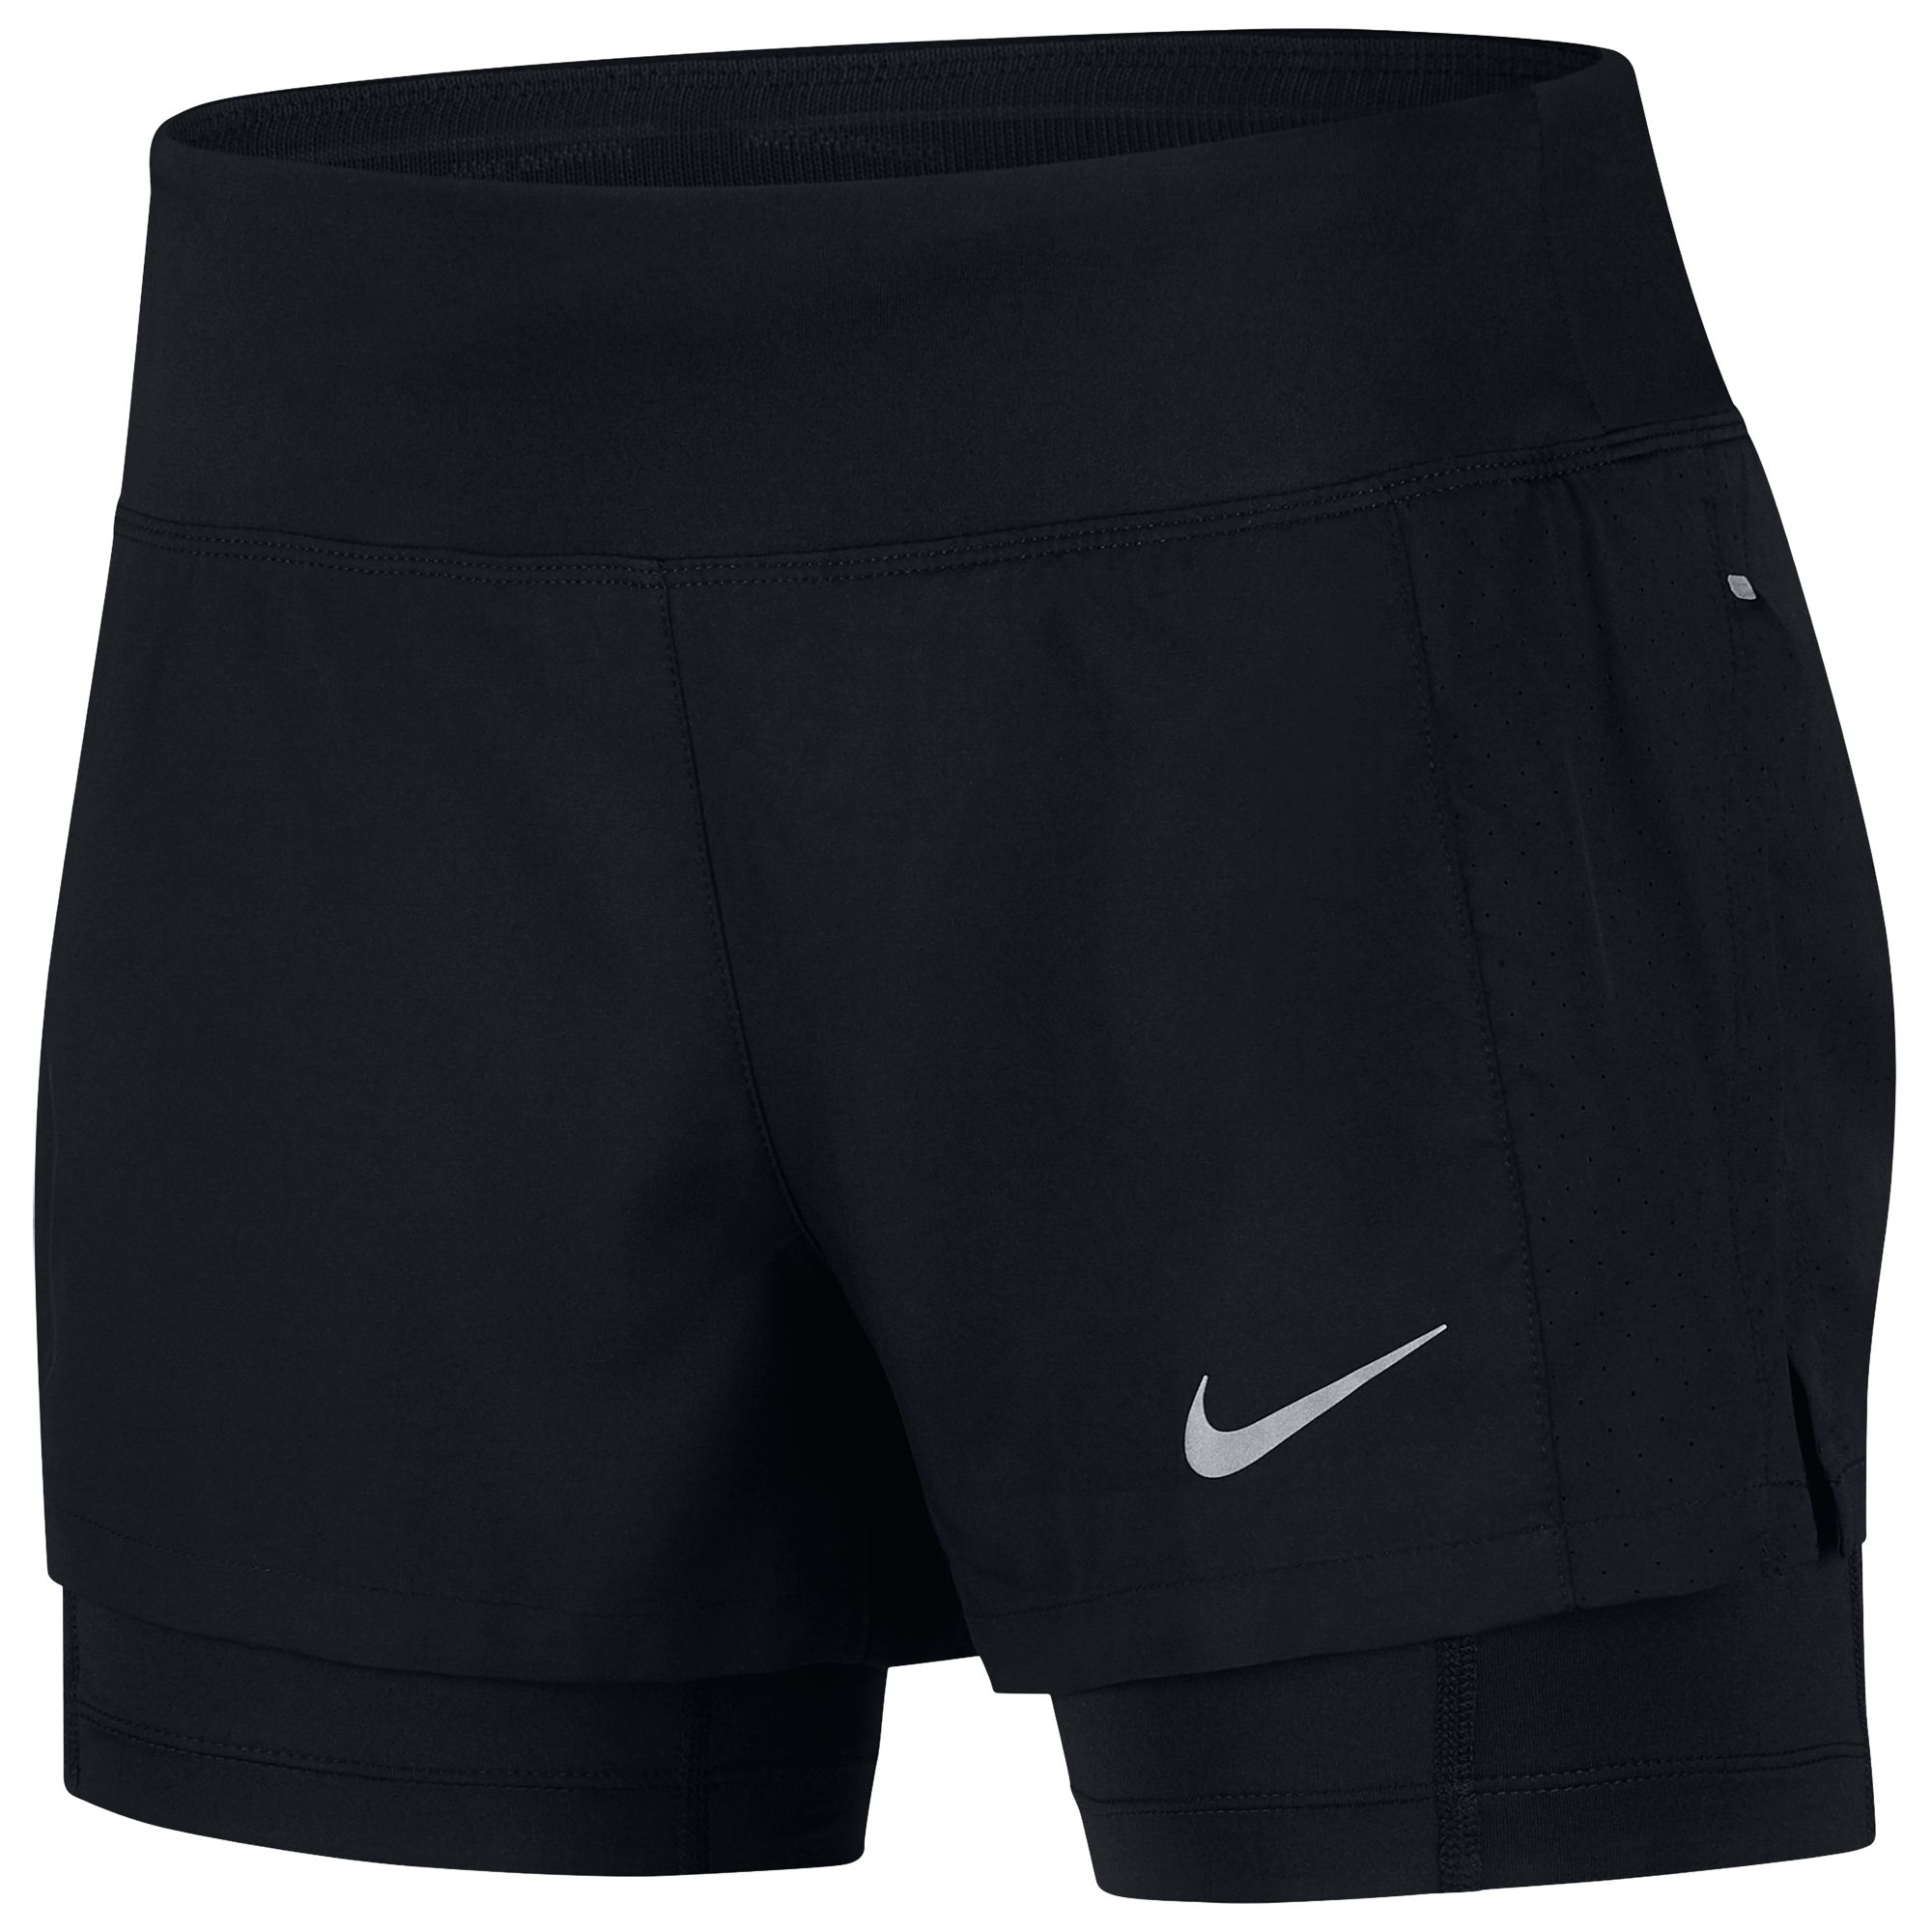 Nike Eclipse 2-in-1 Running Shorts, Black/Reflective Silver